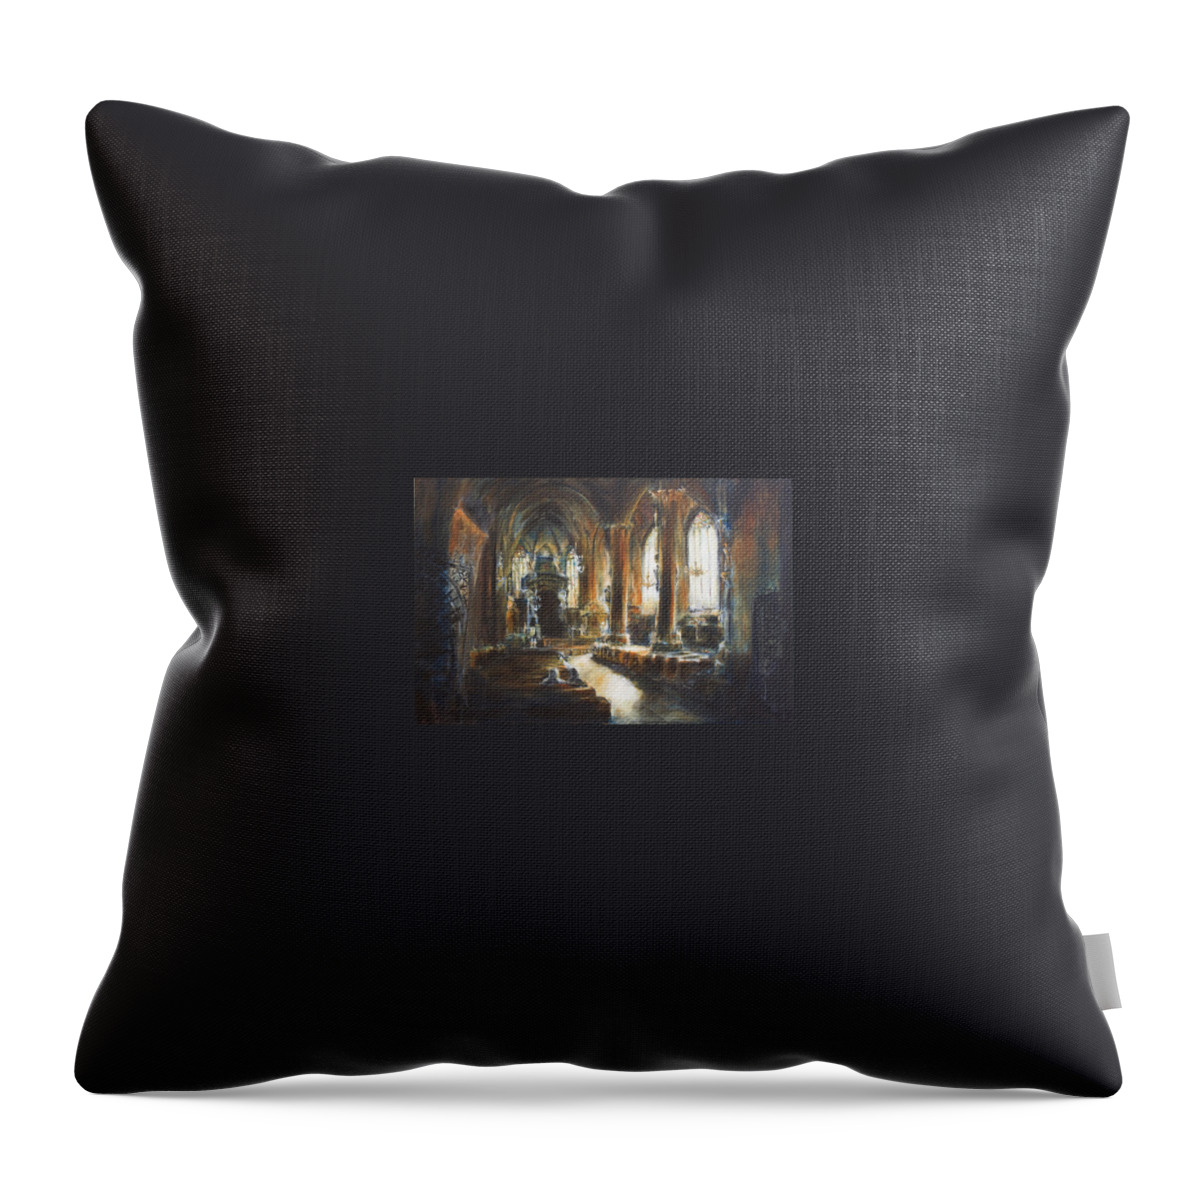 Church Throw Pillow featuring the painting Gothic Church by Nik Helbig